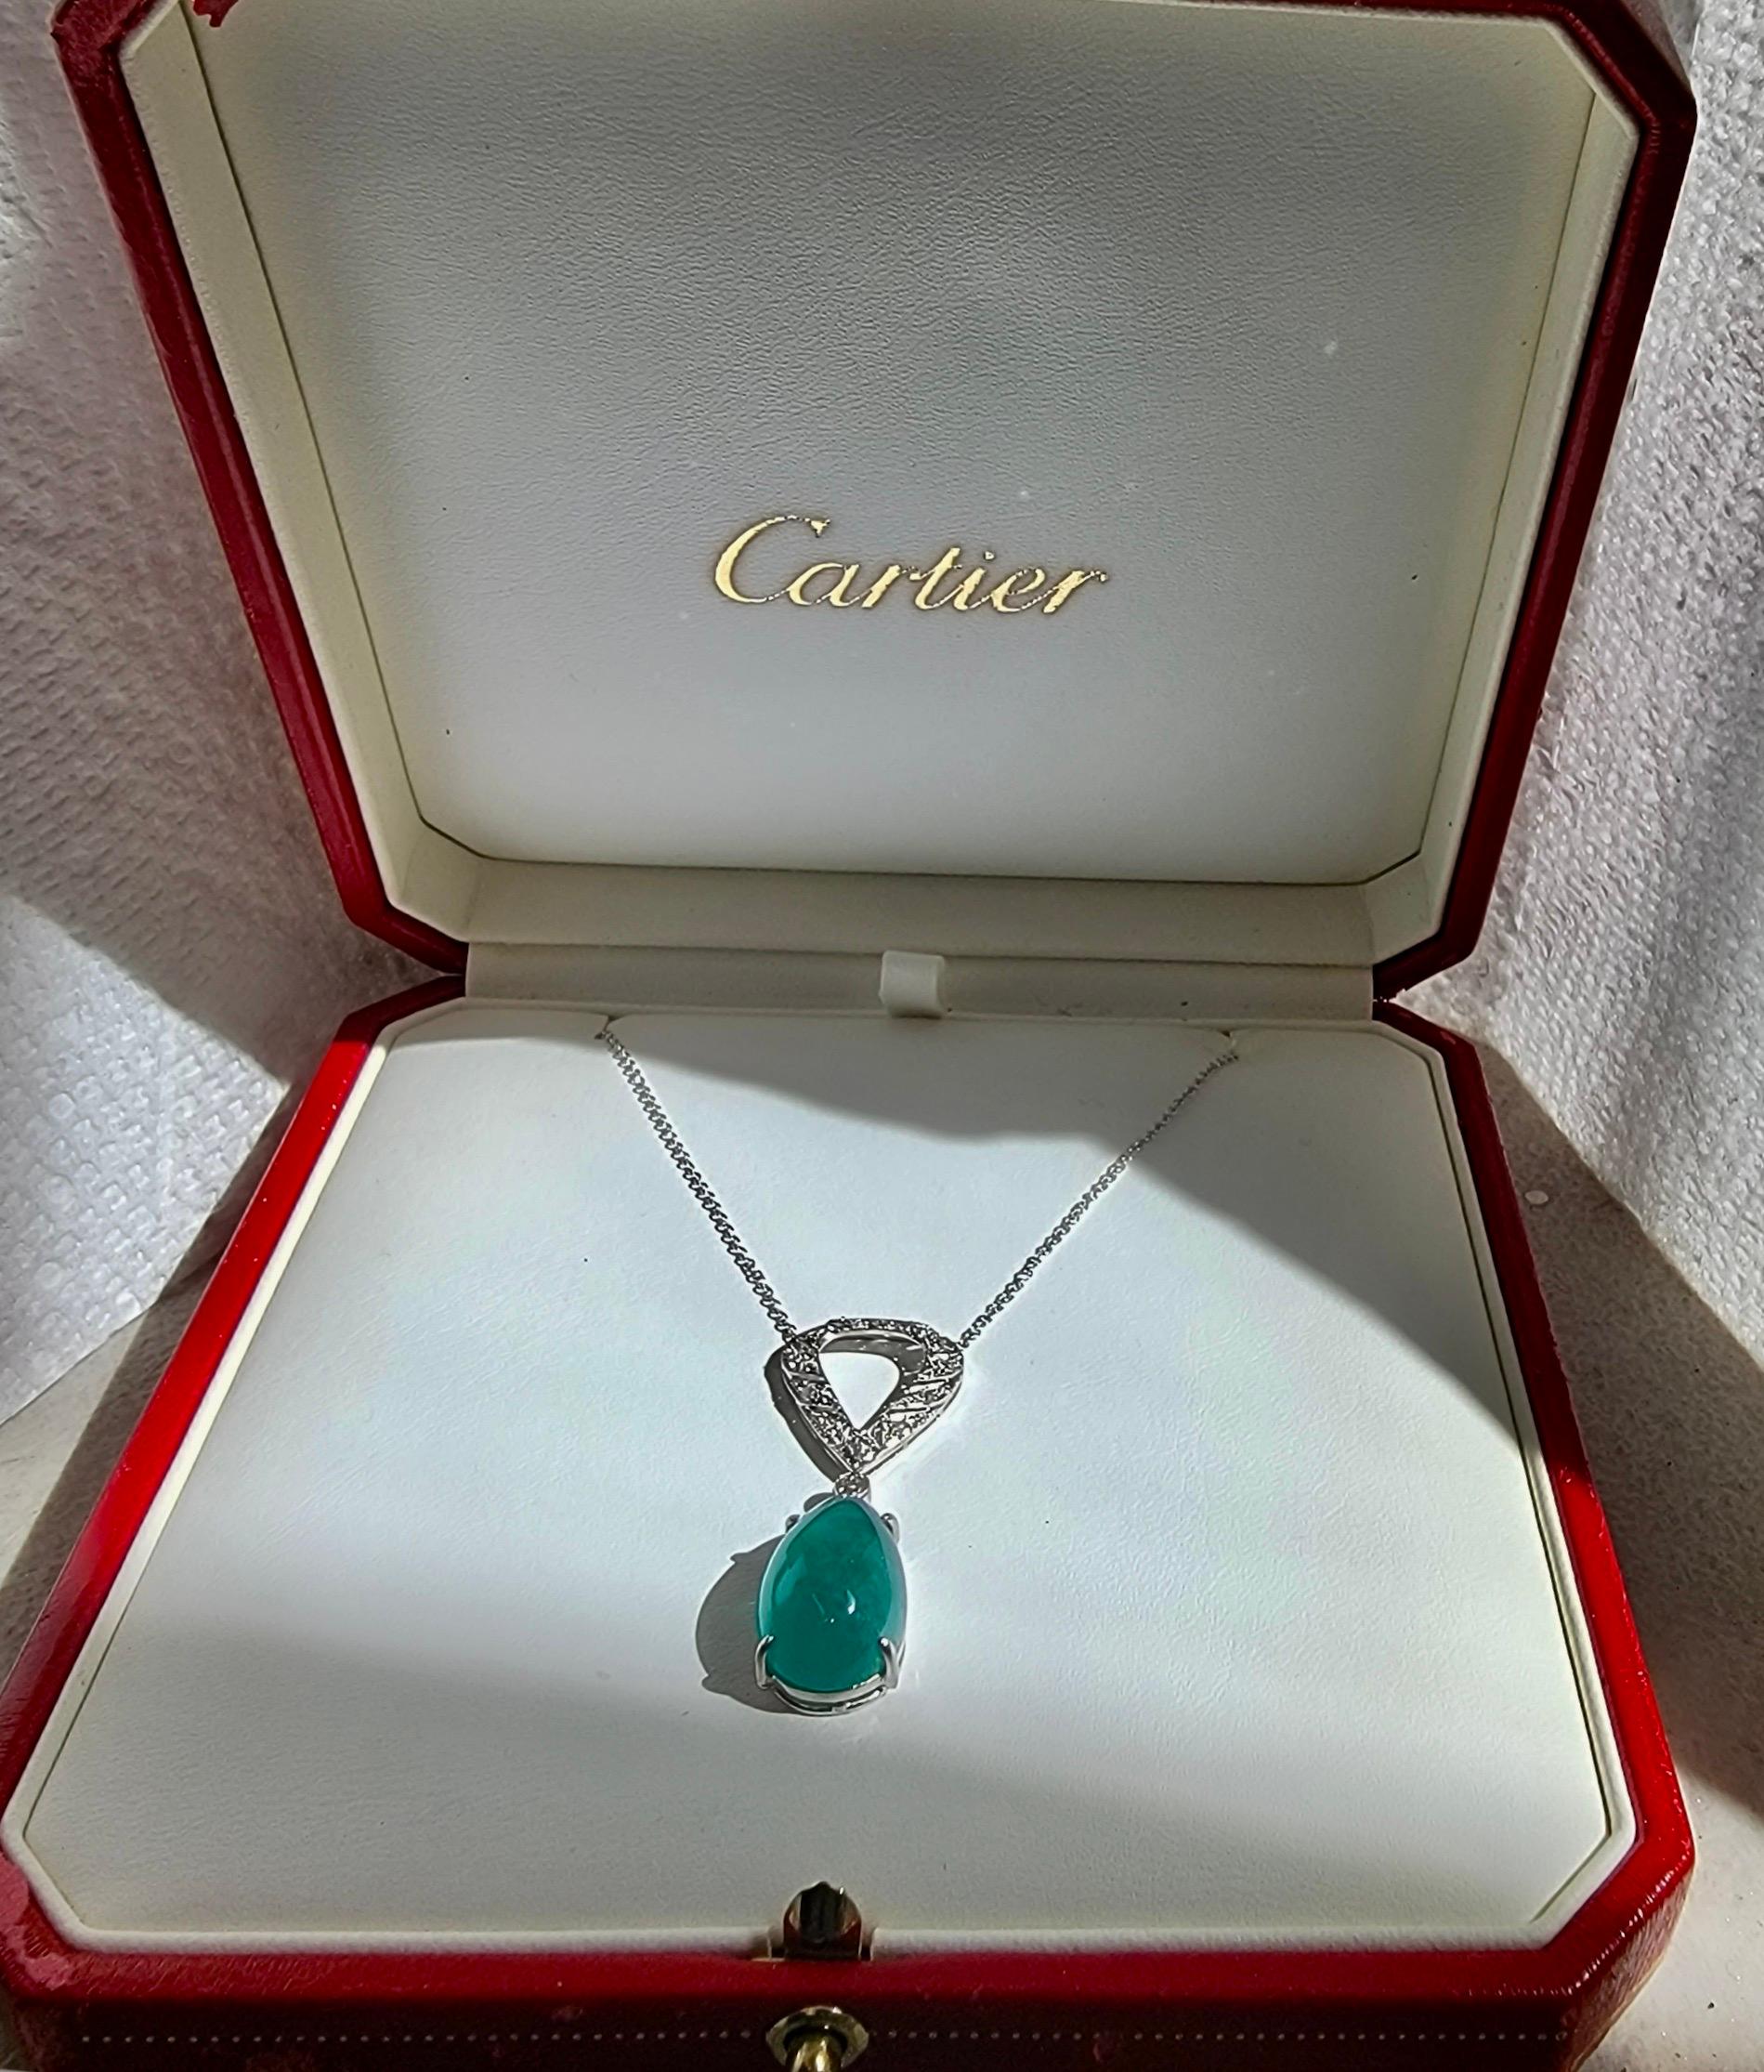 his vintage 1950s large emerald & diamond pendant was a family heirloom. A stunning deep green emerald is prong set within a platinum setting. The pendant & small diamond link are suspended & dangle from an elegant understated ovoid shape diamond